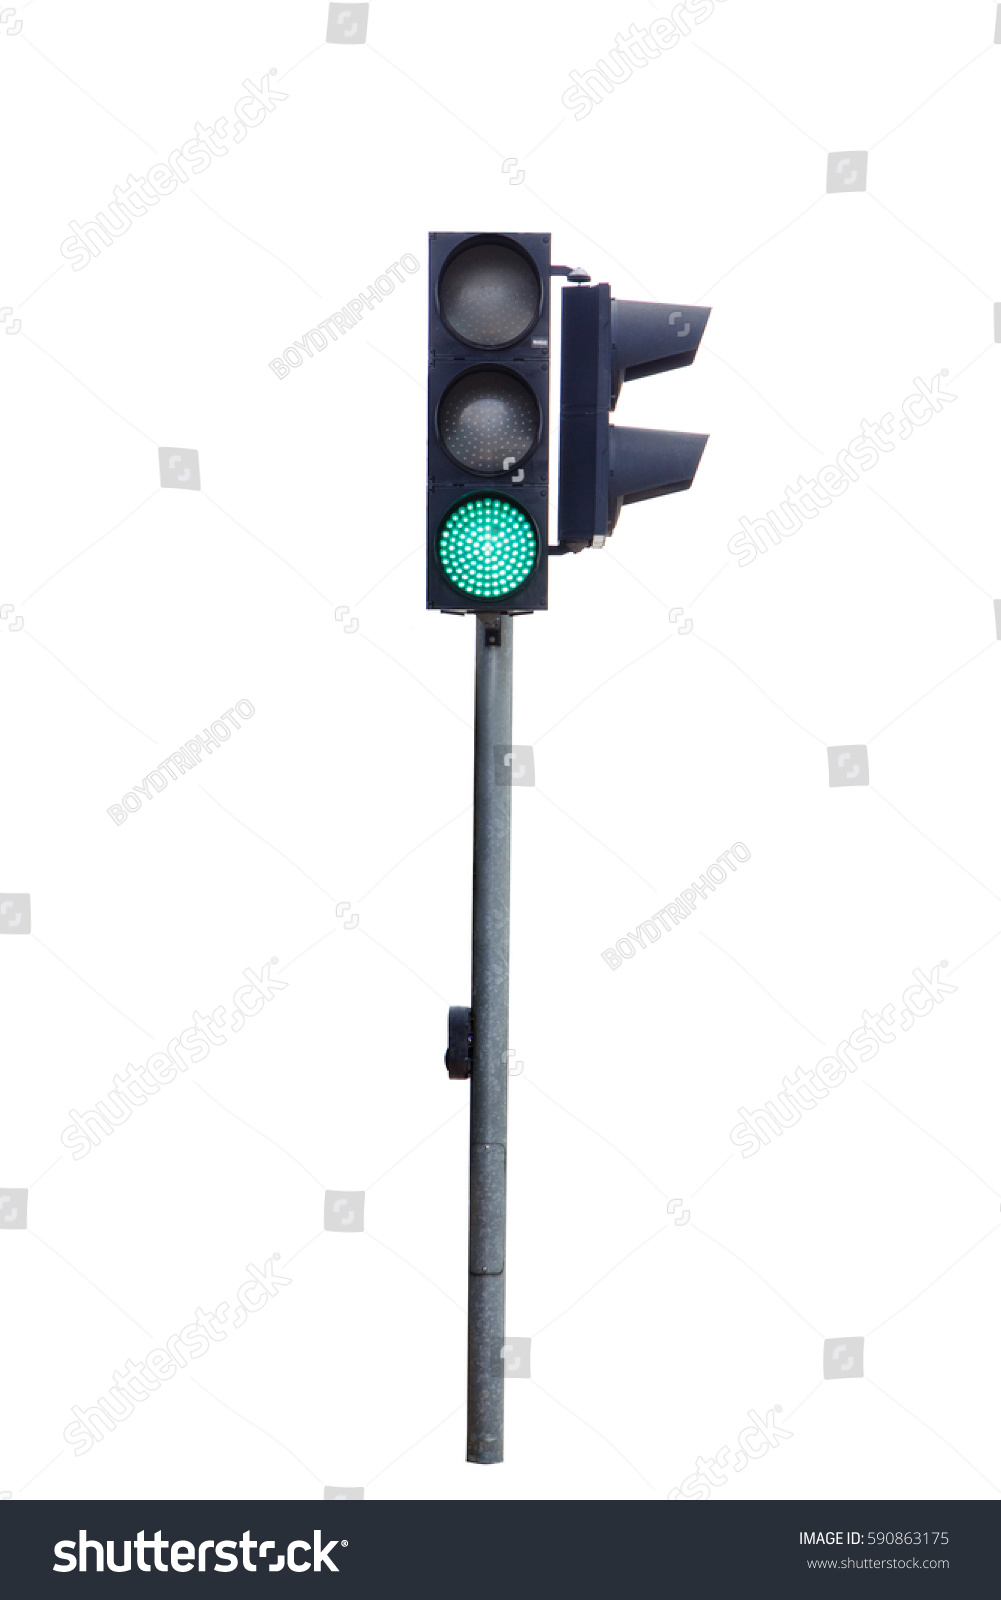 green color traffic light isolated on white background, Real photo #590863175